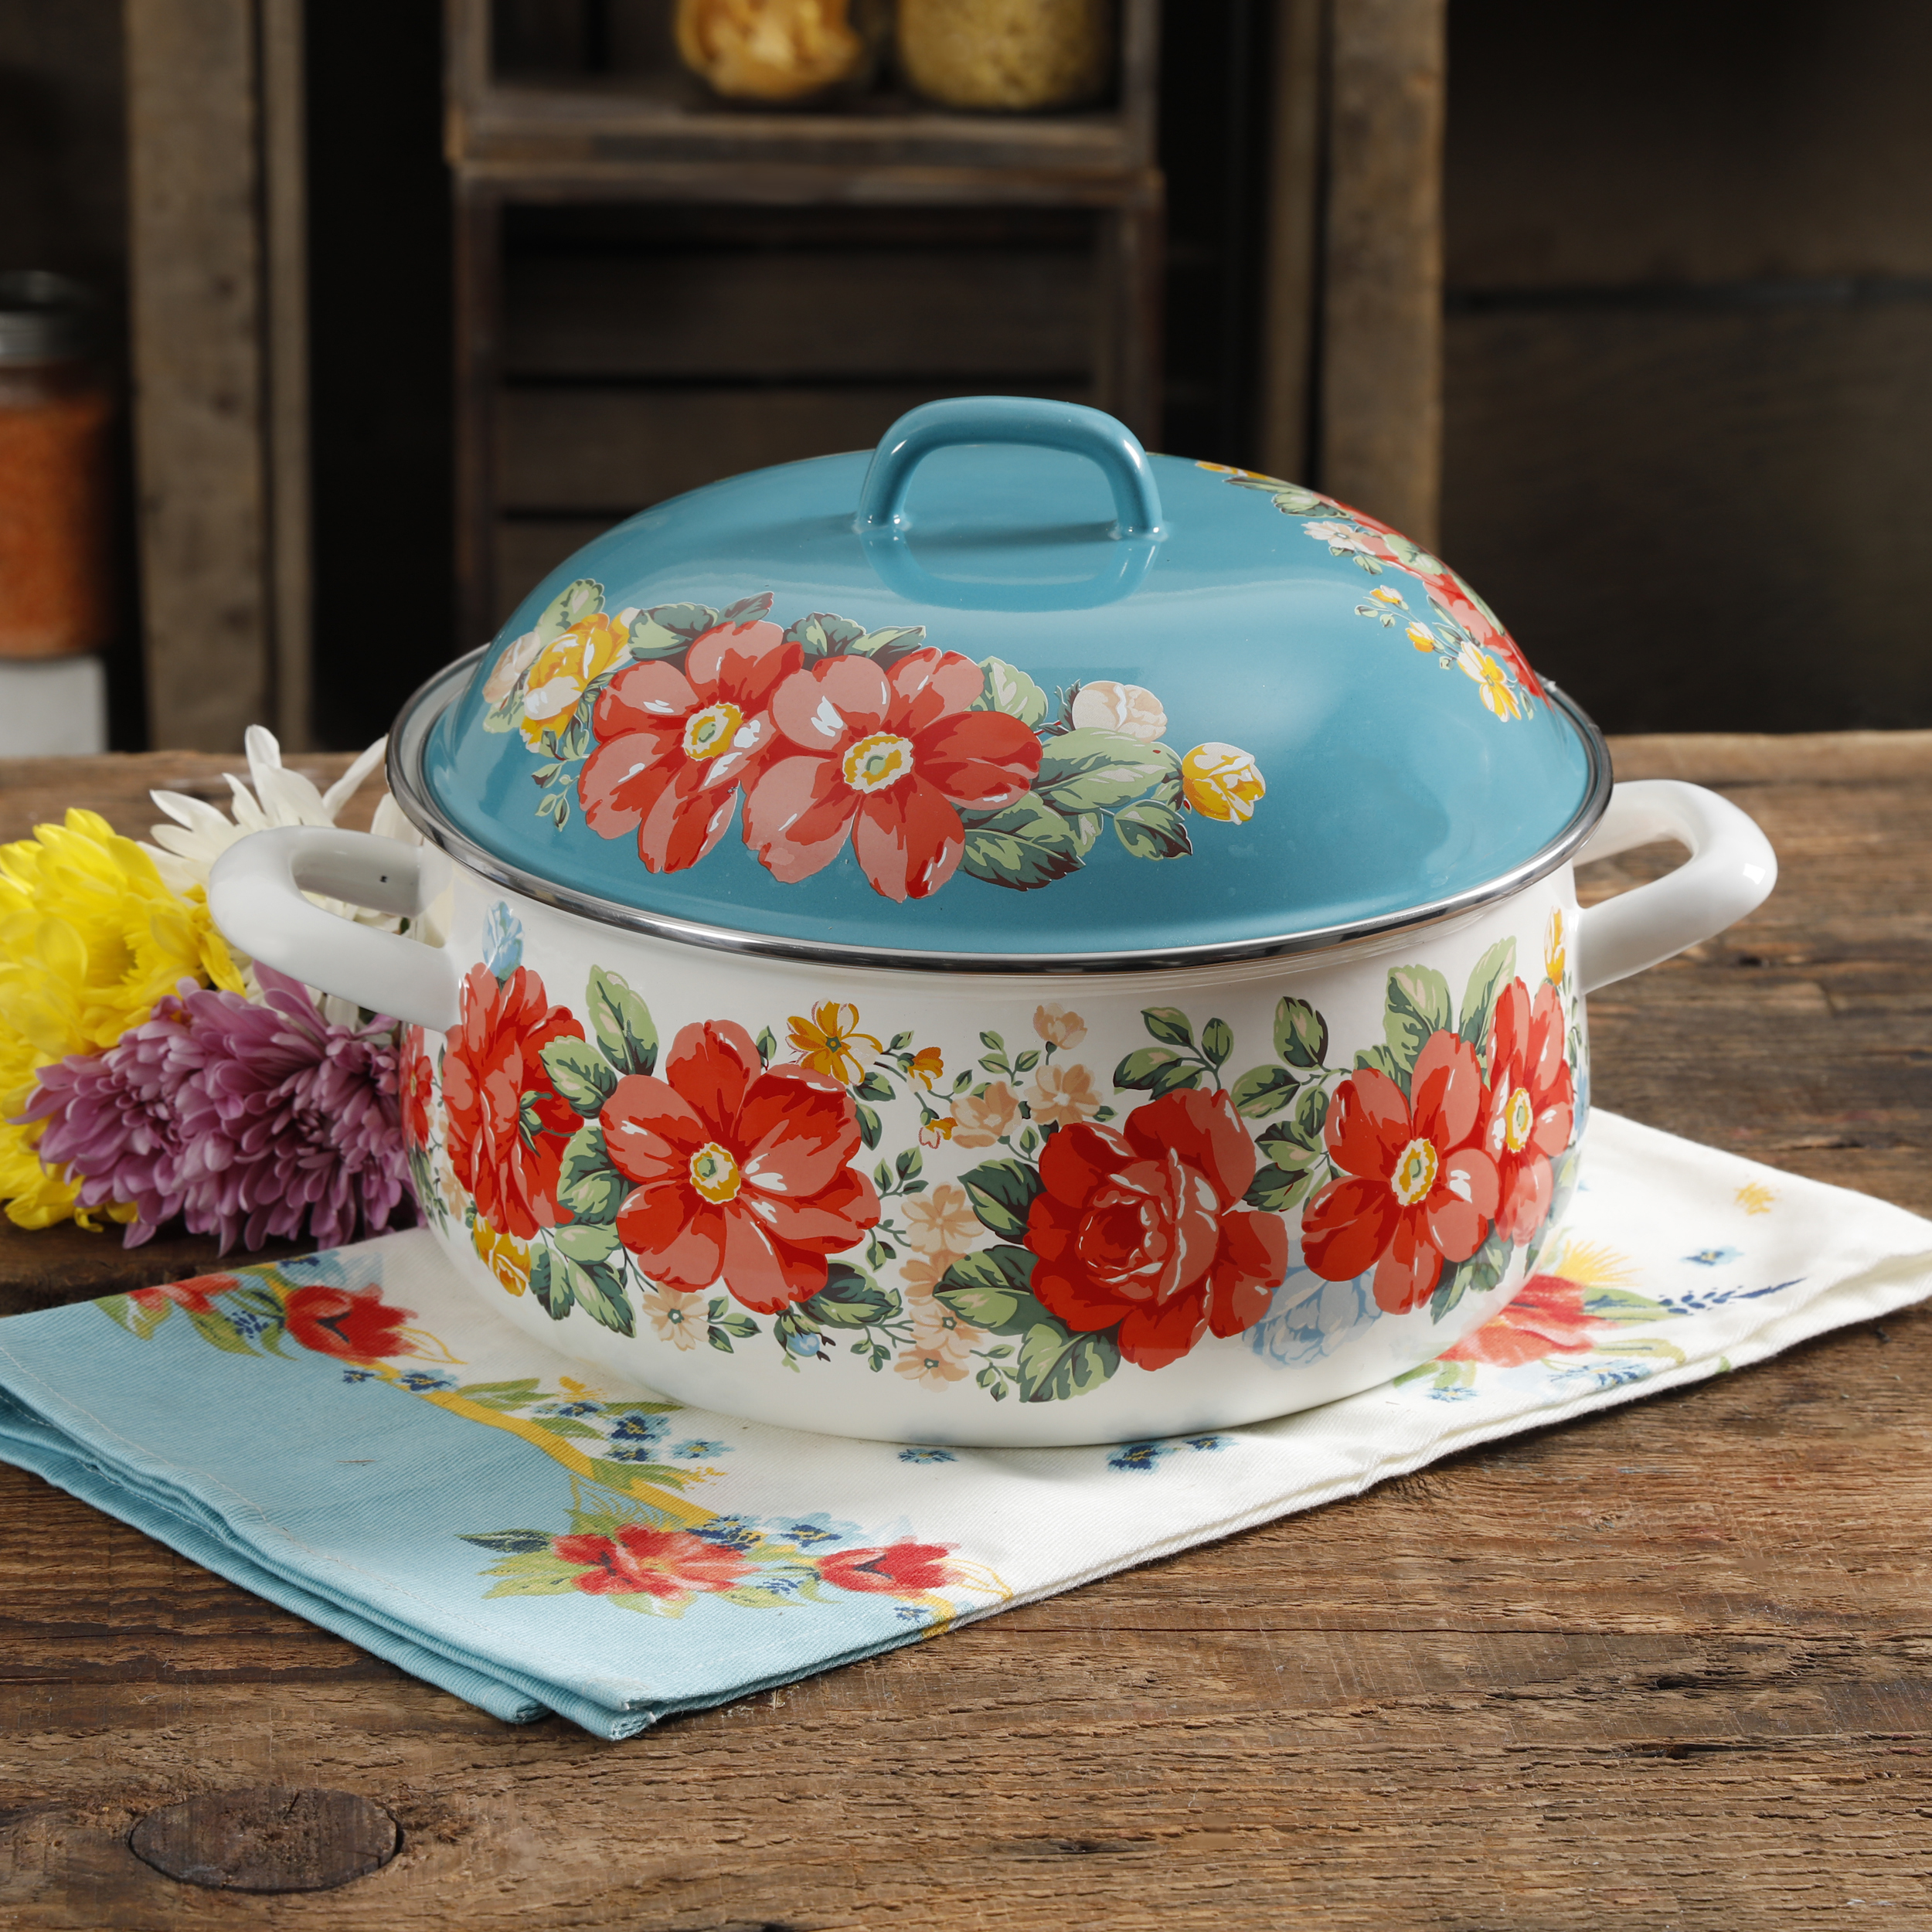 The Pioneer Woman Vintage Floral 4 Quart Enamel Cast Iron Dutch Oven with Lid - image 1 of 4